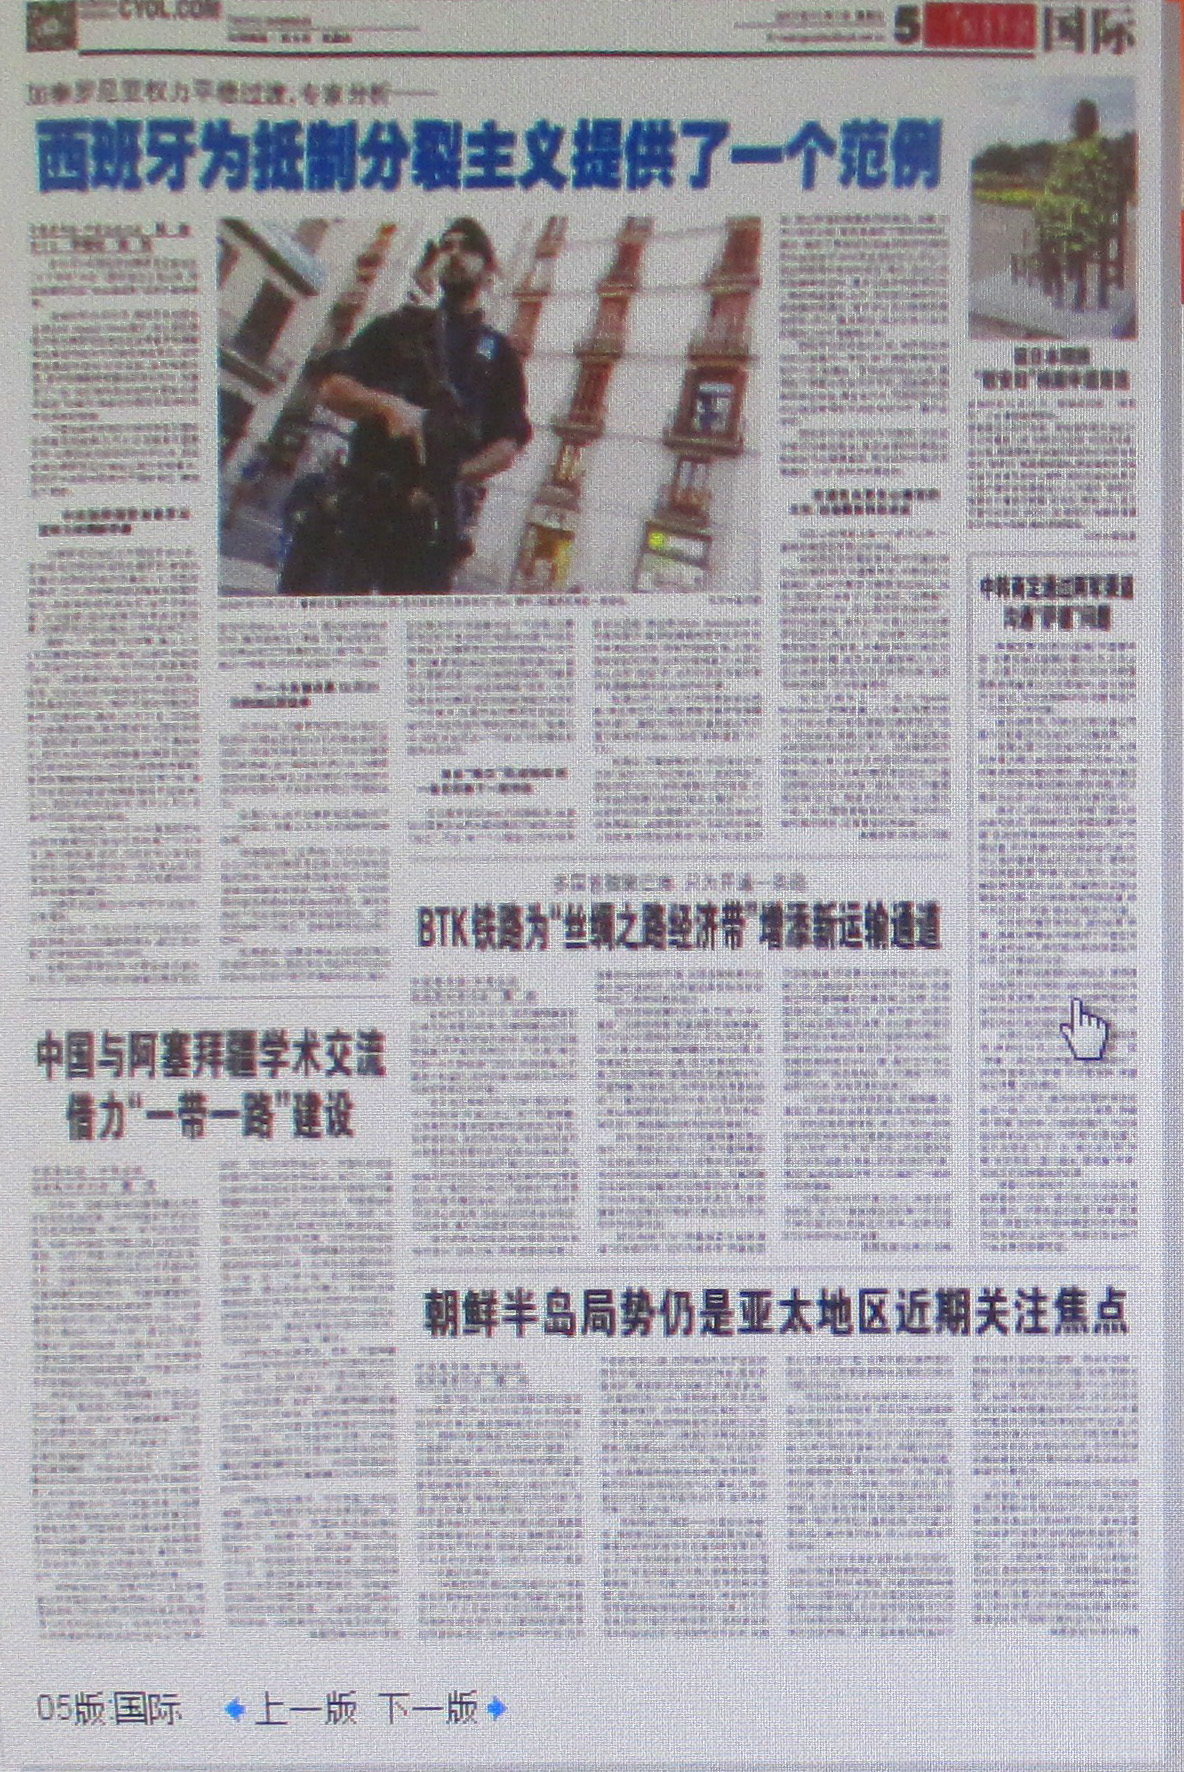 Newspaper “China Youth” published the article on science-literary ties between Azerbaijan and China in Beijing